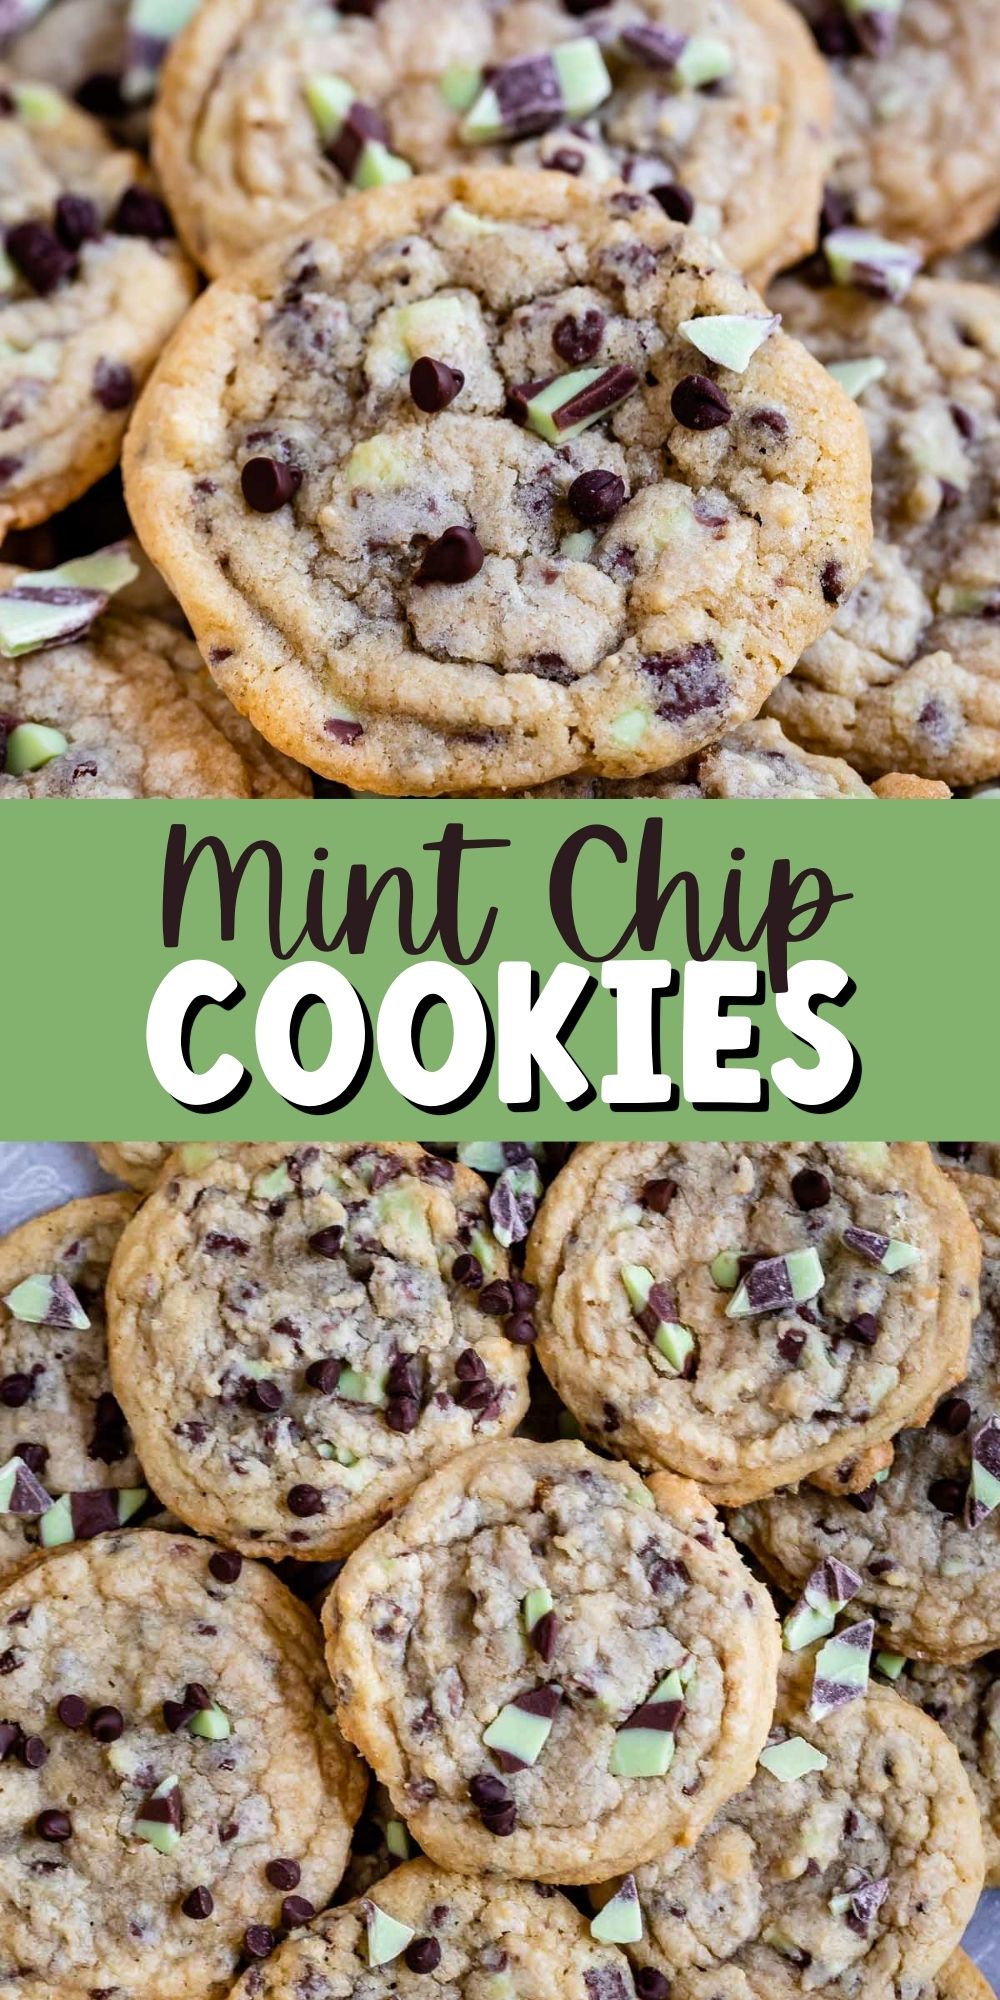 two photos of chocolate chip cookies with mint chips bakes in